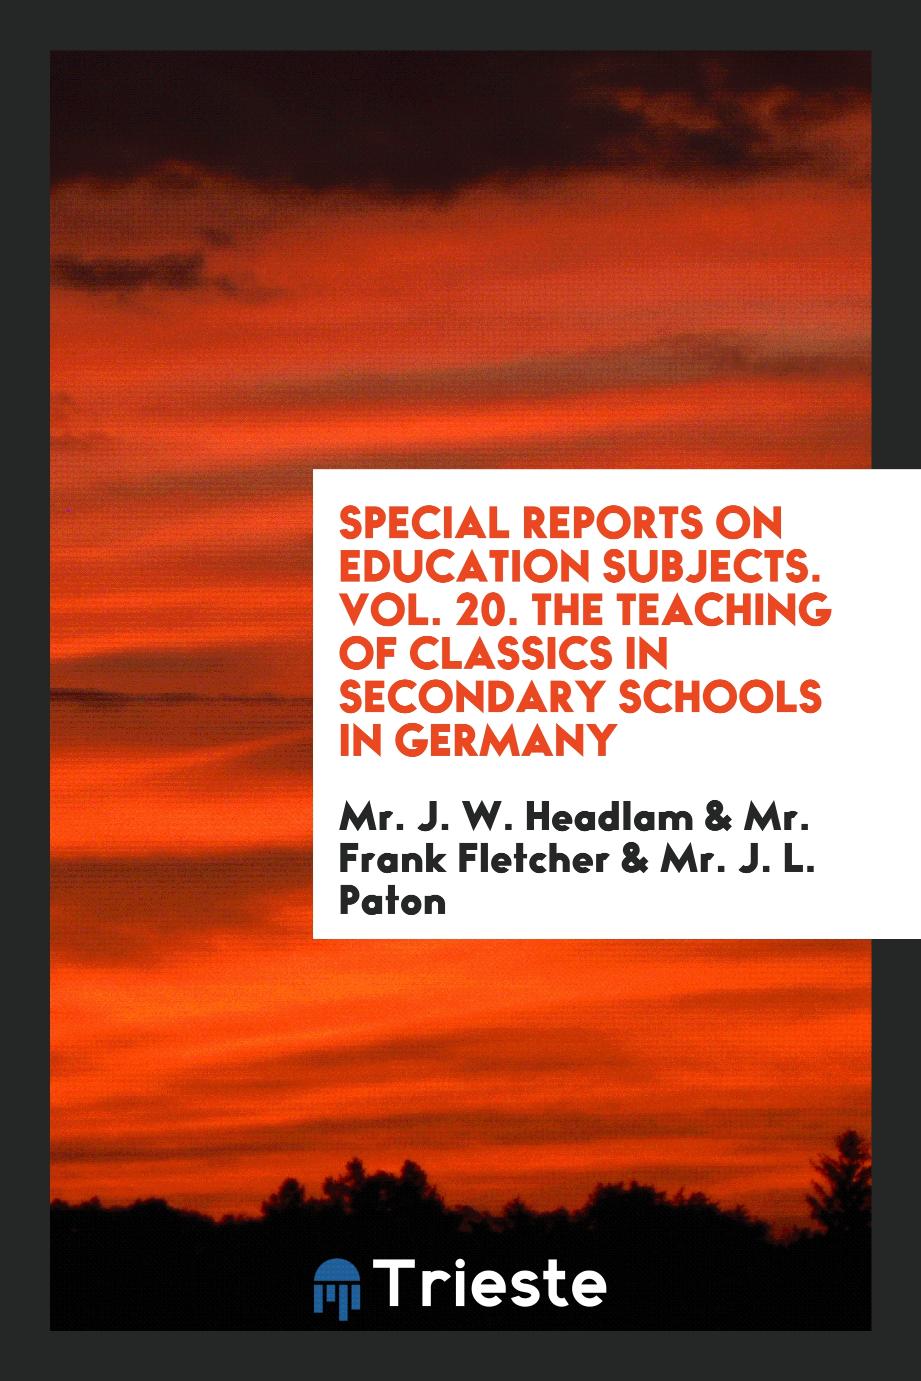 Special reports on education subjects. Vol. 20. The teaching of classics in secondary schools in Germany